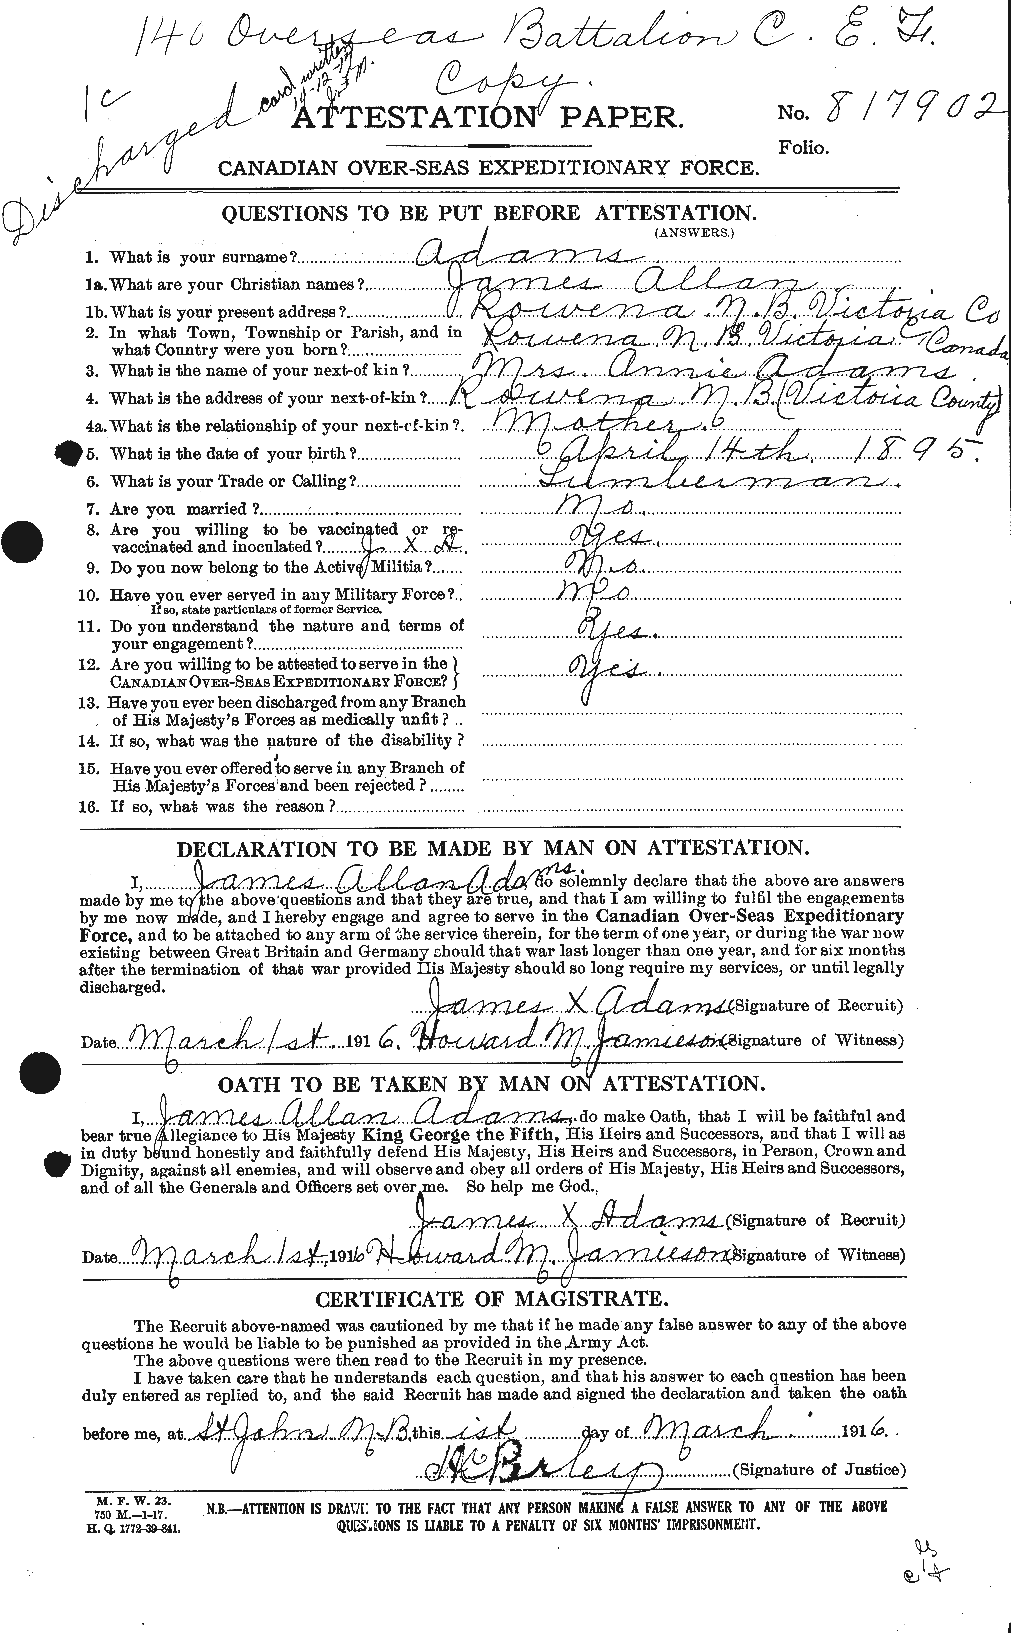 Personnel Records of the First World War - CEF 203246a